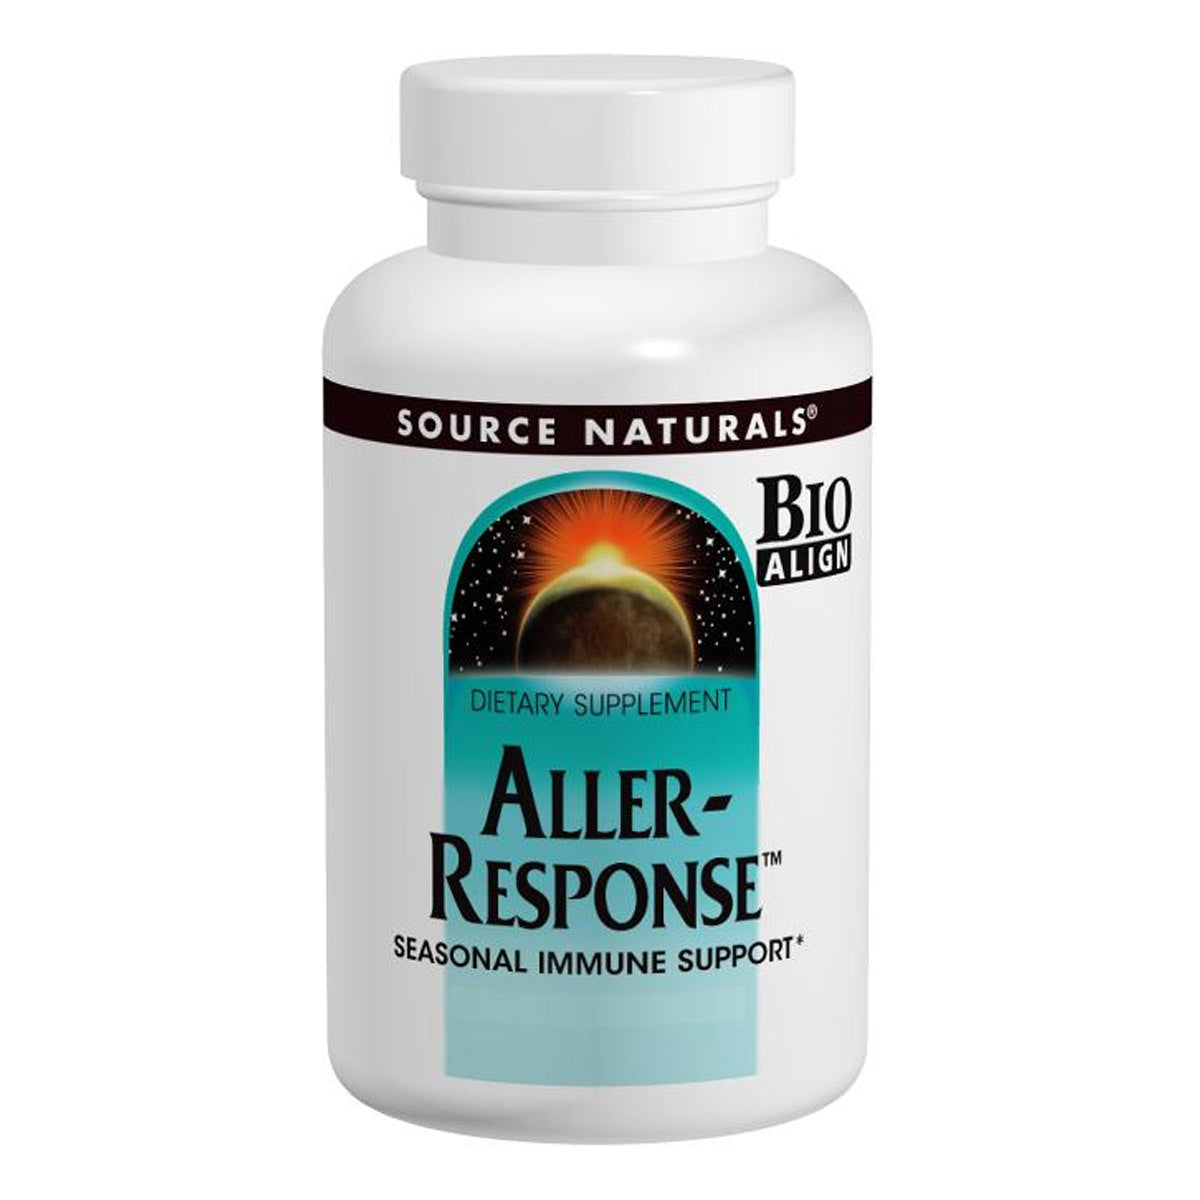 Primary image of Aller-Response